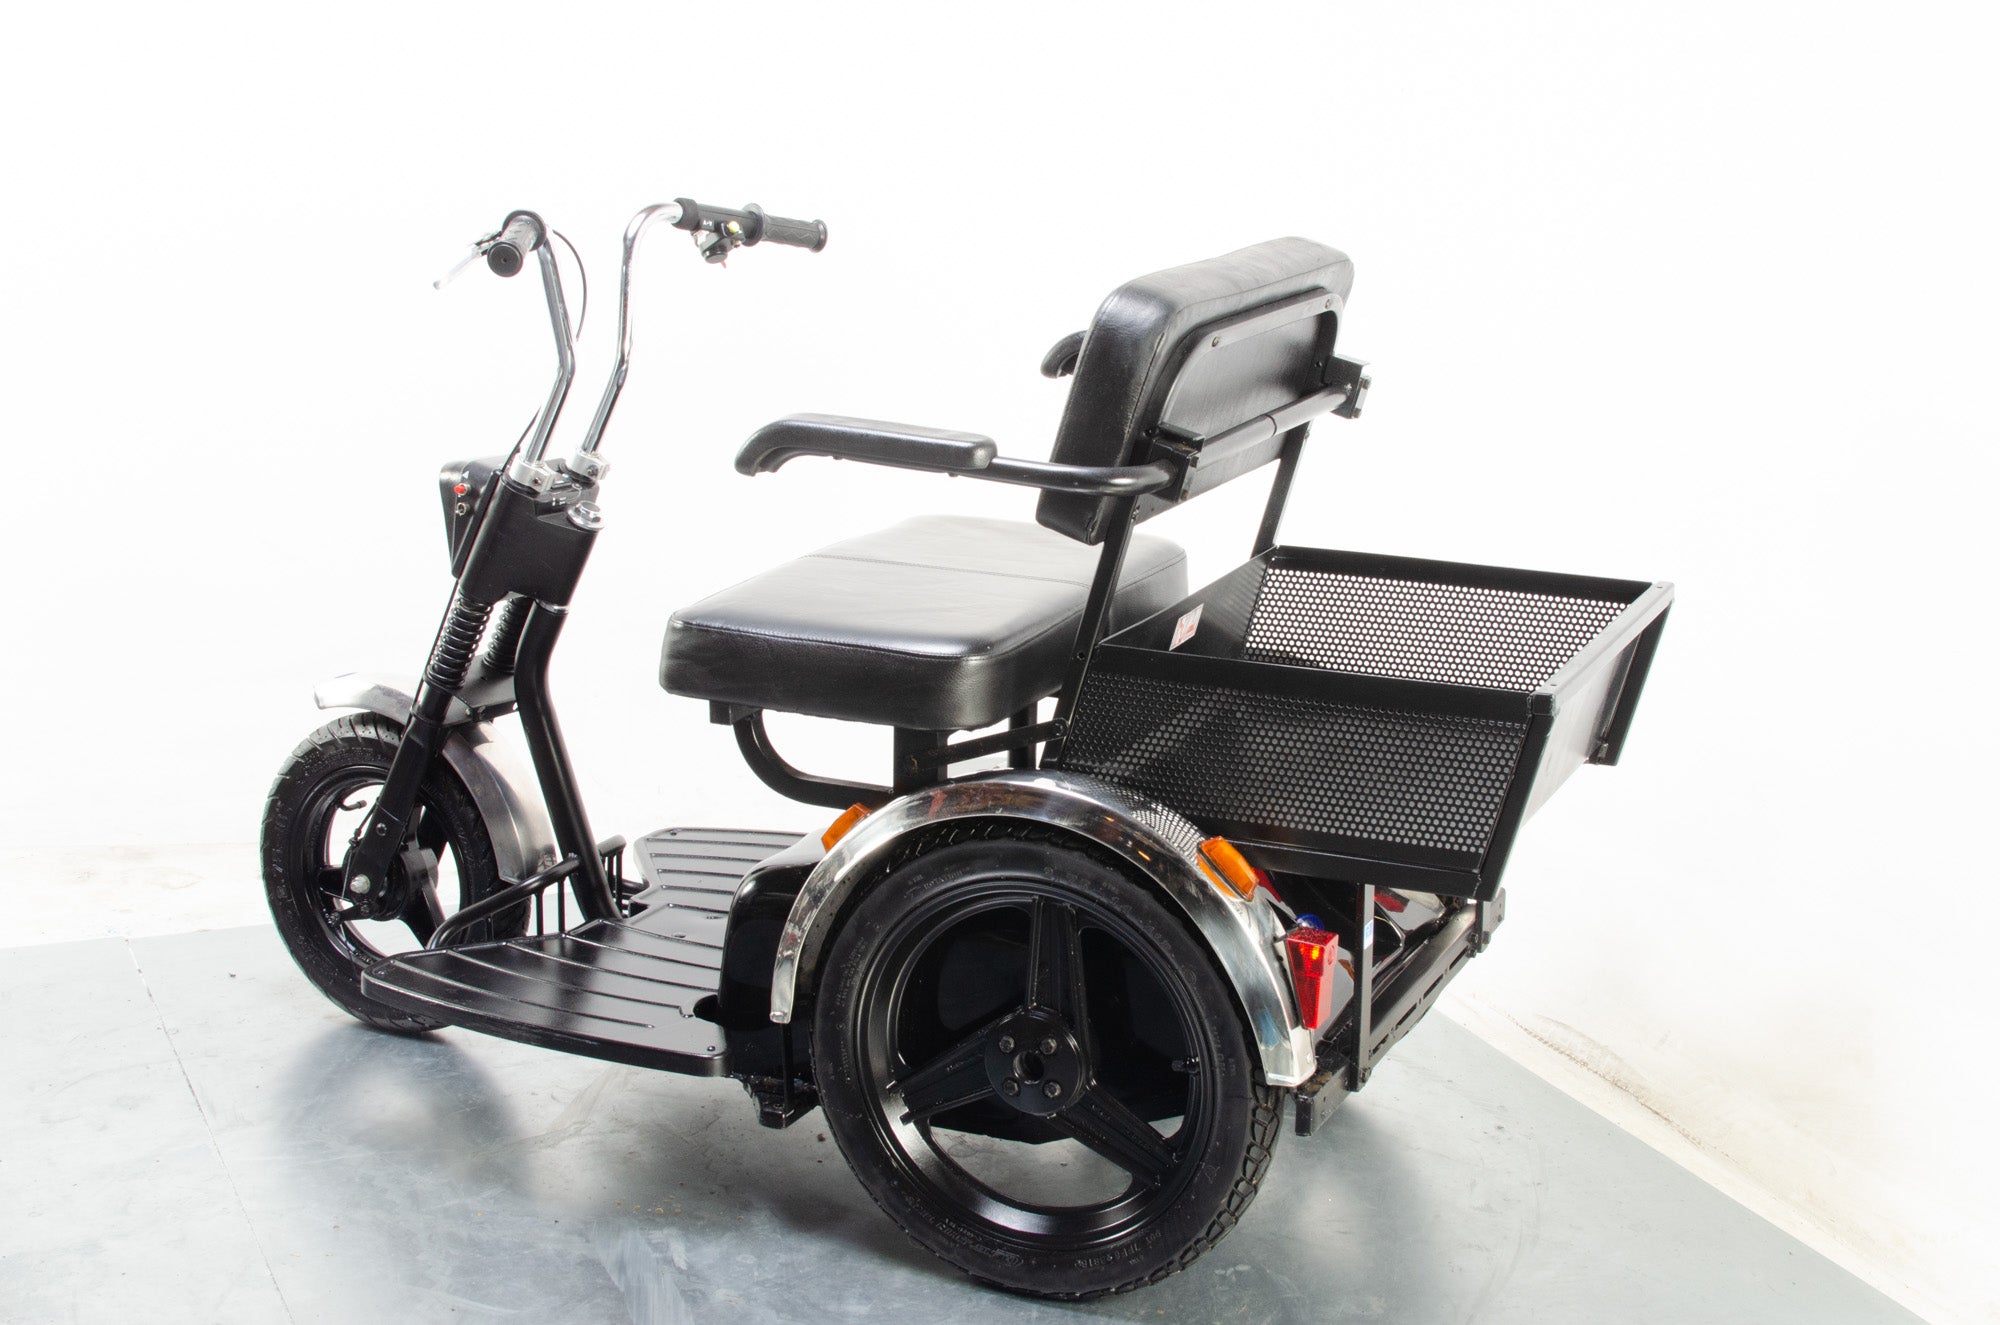 TGA Supersport Twin Seat Tandem Electric Mobility Scooter Trike Road Legal